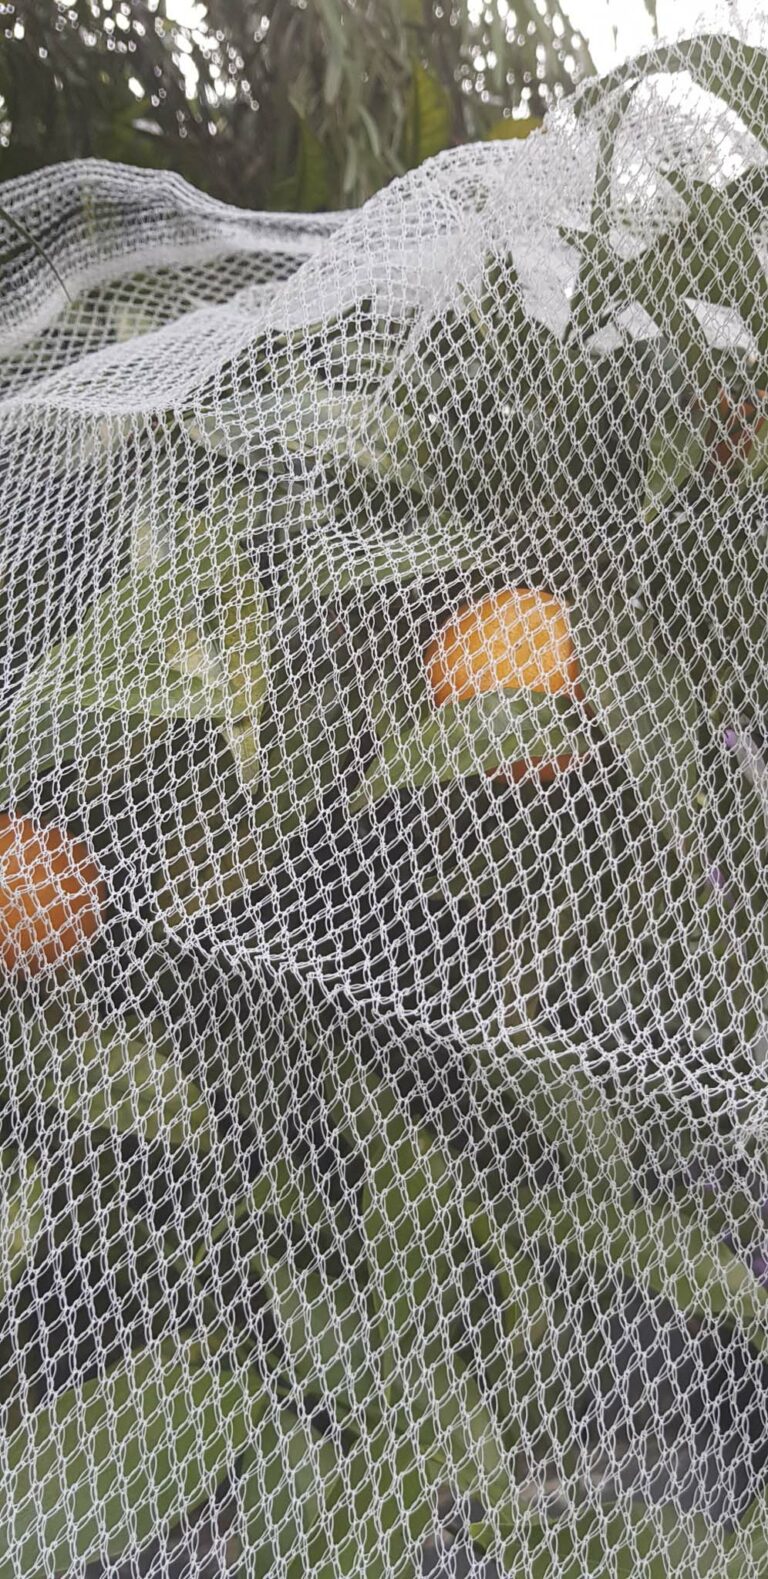 What Is the Best Netting for Insects? — GreenlifeGRO